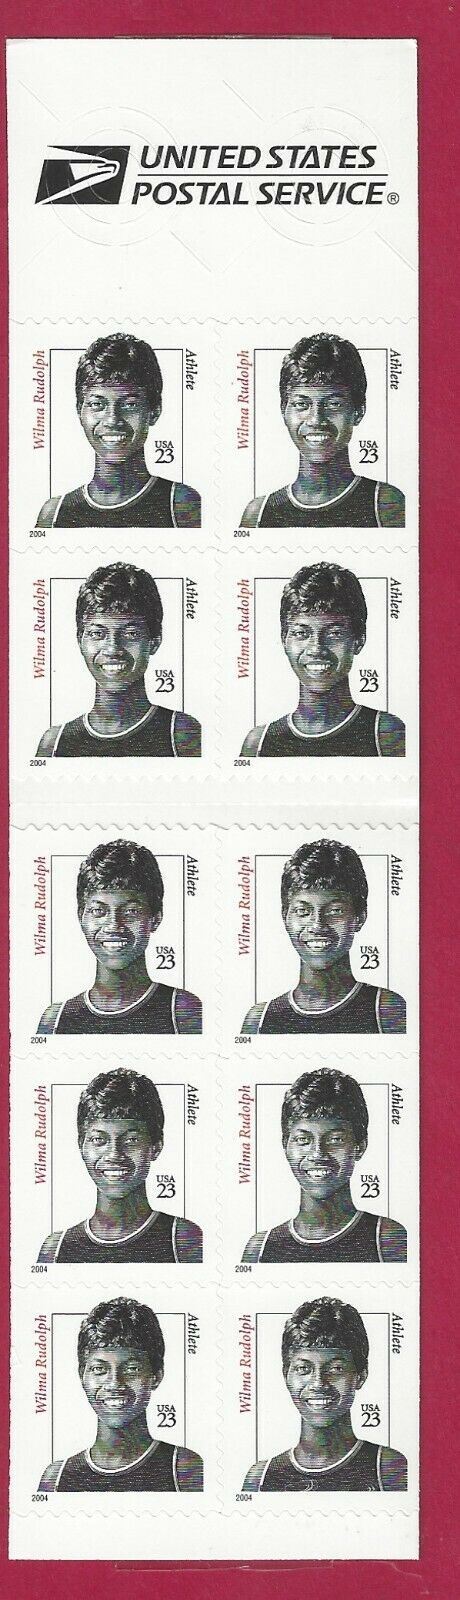 U.s 2004 Wilma Rudolph 23 Cents Bk279a Bc153a Mint Booklet Of 10 Issued W/ No Pn